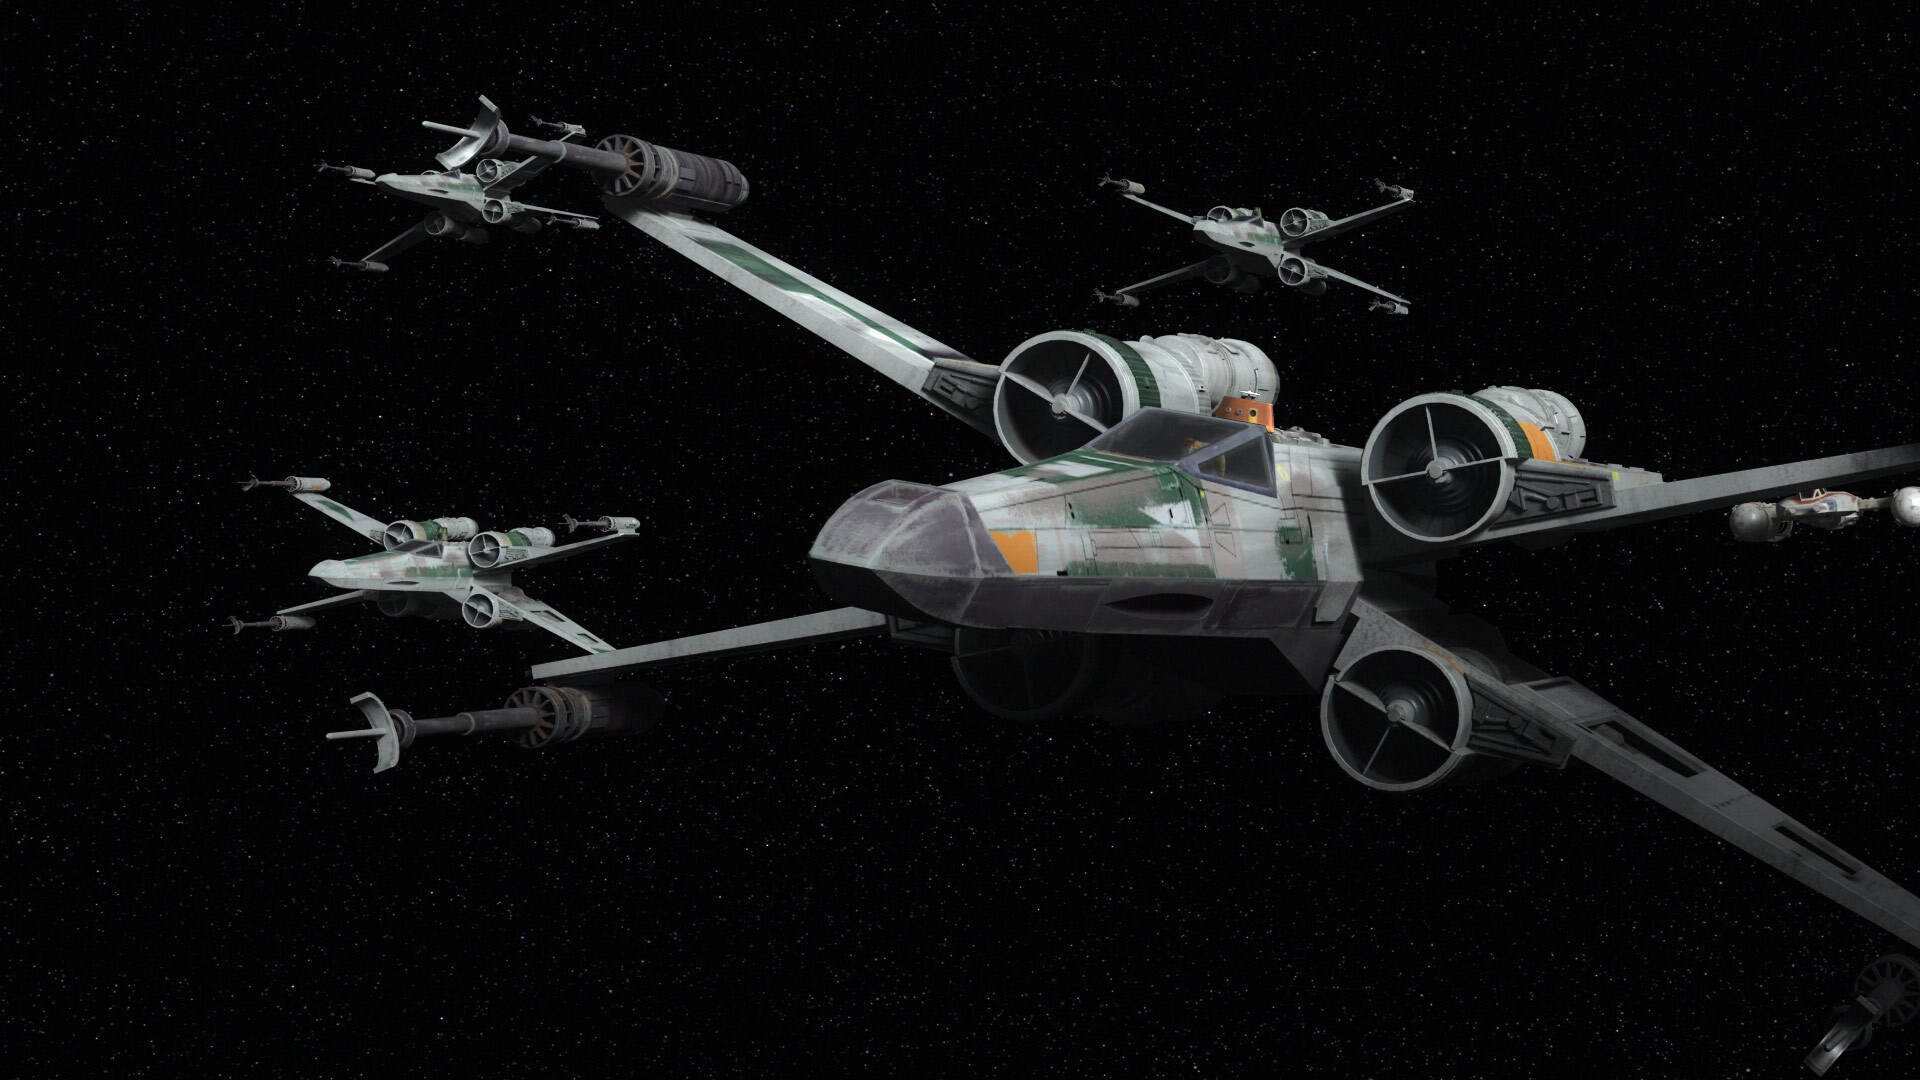 The Rebellion's X-wing squadron arrives at Lothal, led by Hera Syndulla. Their primary target: th...